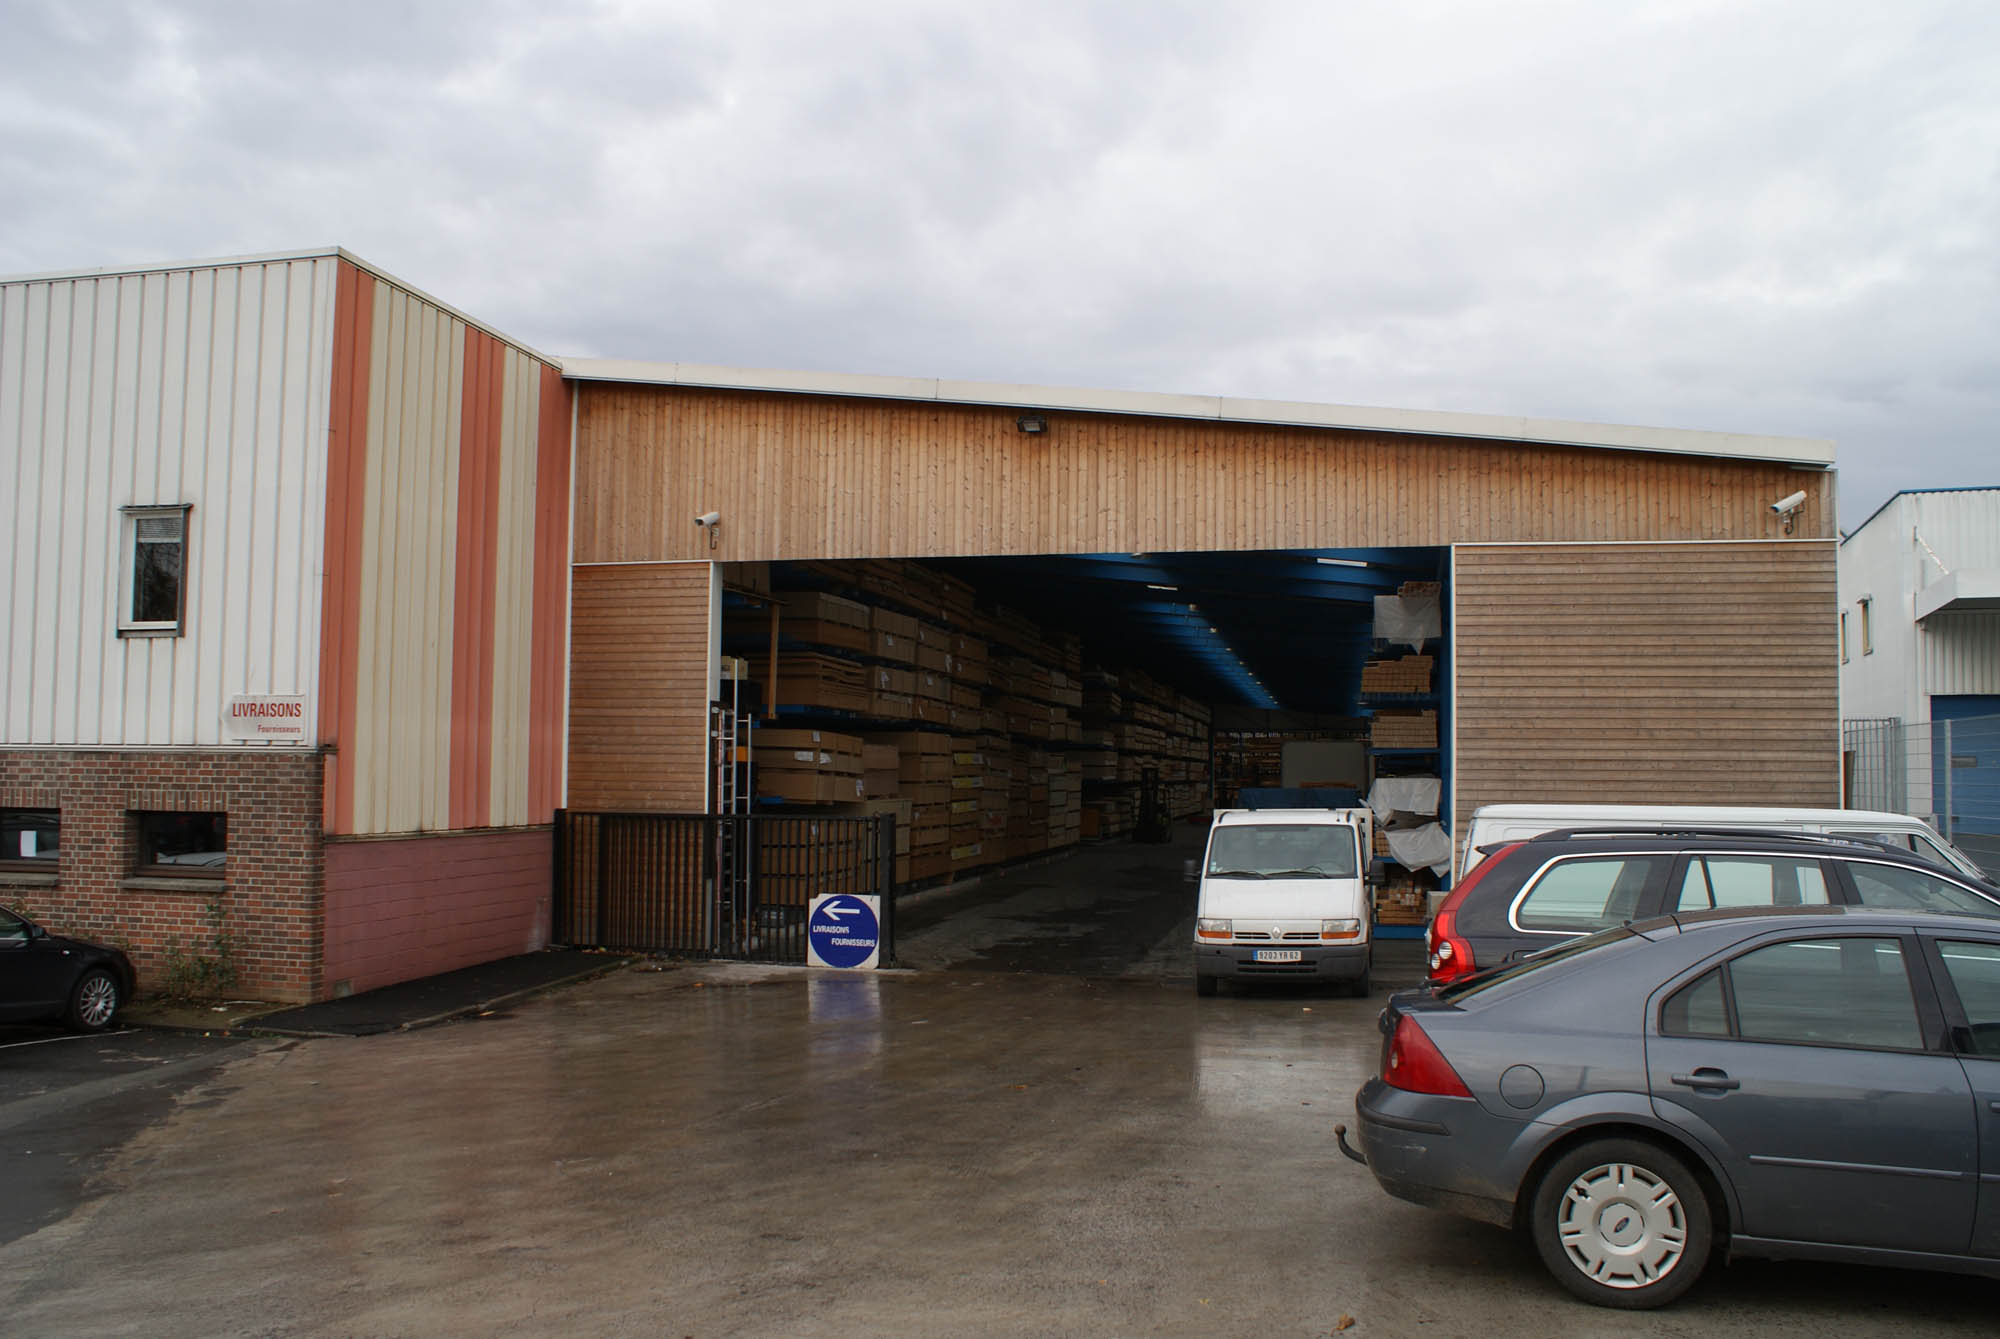 cantilever racking with roof for timber storage